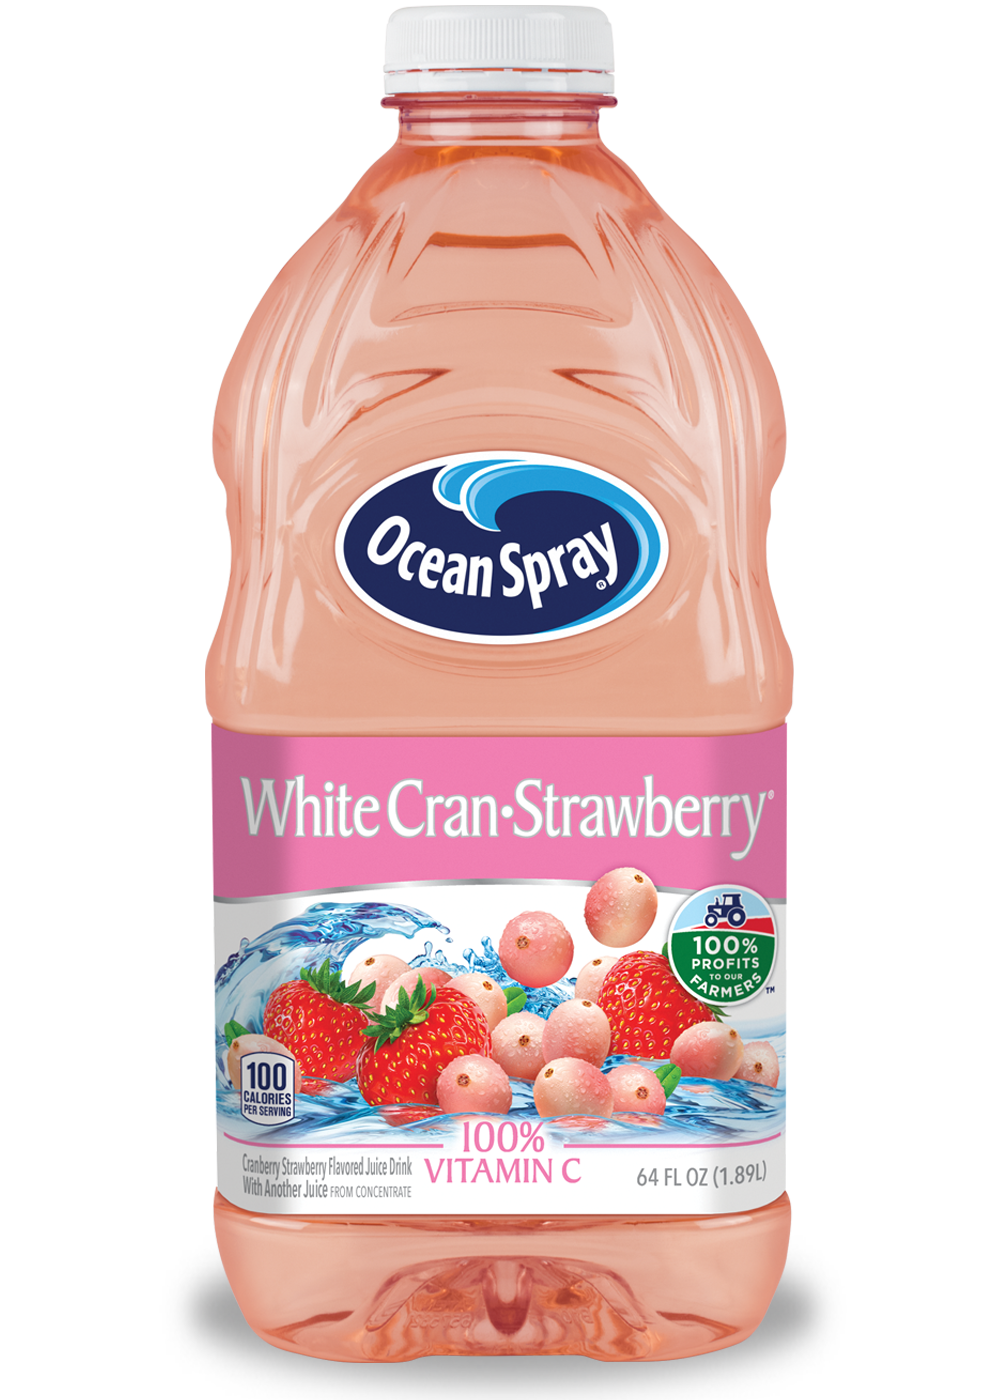 White Cran•Strawberry® White Cranberry and Strawberry Juice Drink